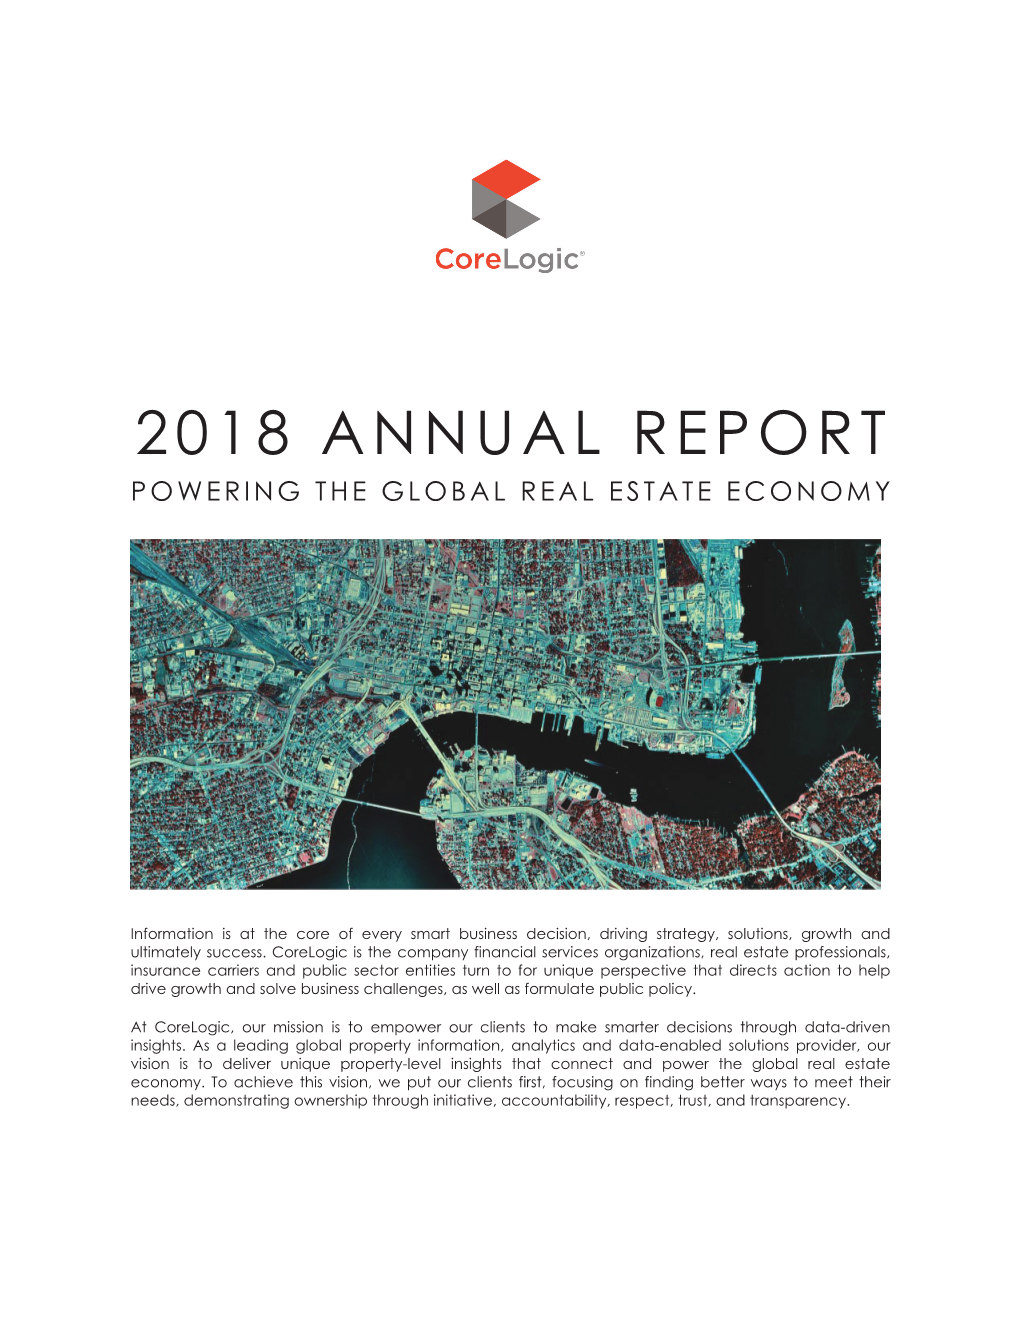 2018 Annual Report Powering the Global Real Estate Economy